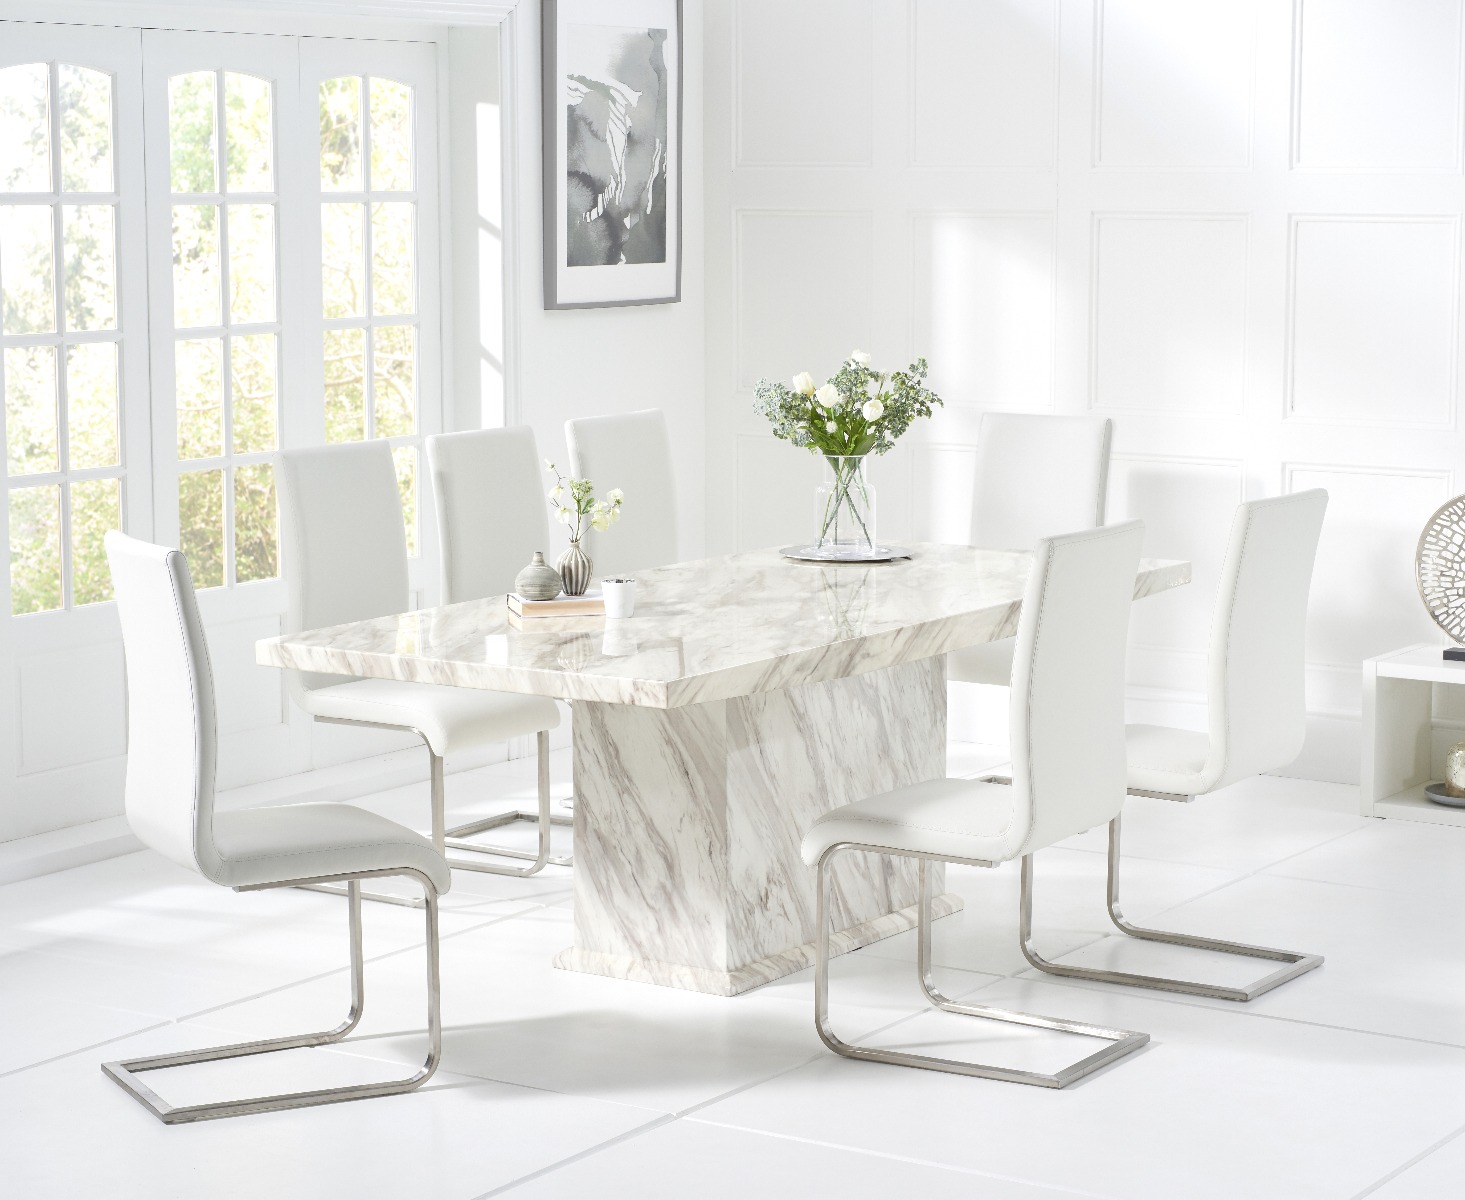 Calacatta 220cm Marbleeffect Dining Table With 12 White Malaga Chairs